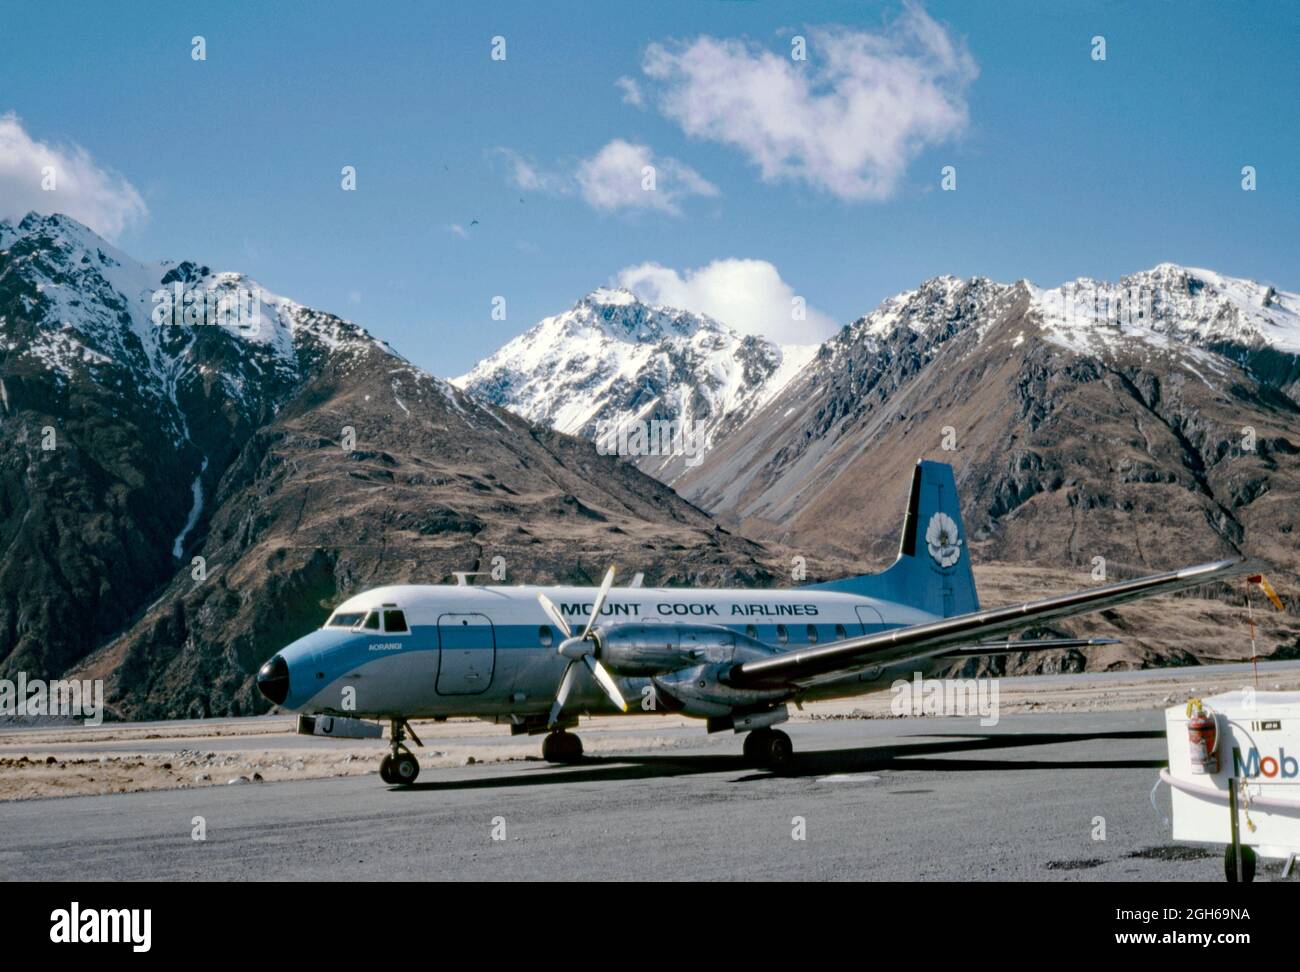 A Hawker Siddeley HS 748 airliner of New Zealand’s Mount Cook Airlines on the tarmac at Queenstown Airport in 1979 with the Southern Alps behind. Mount Cook Airline was a regional airline, founded in 1920, based in Christchurch. It later became a subsidiary of Air New Zealand and in 2019 the brand name was retired. This aircraft is named ‘Aorangi’, a Maori name. On the aircraft tail is an image of the Mount Cook lily (Ranunculus lyallii), the largest buttercup in the world. This image is from an old amateur Kodak colour transparency – a vintage 1970s photograph. Stock Photo